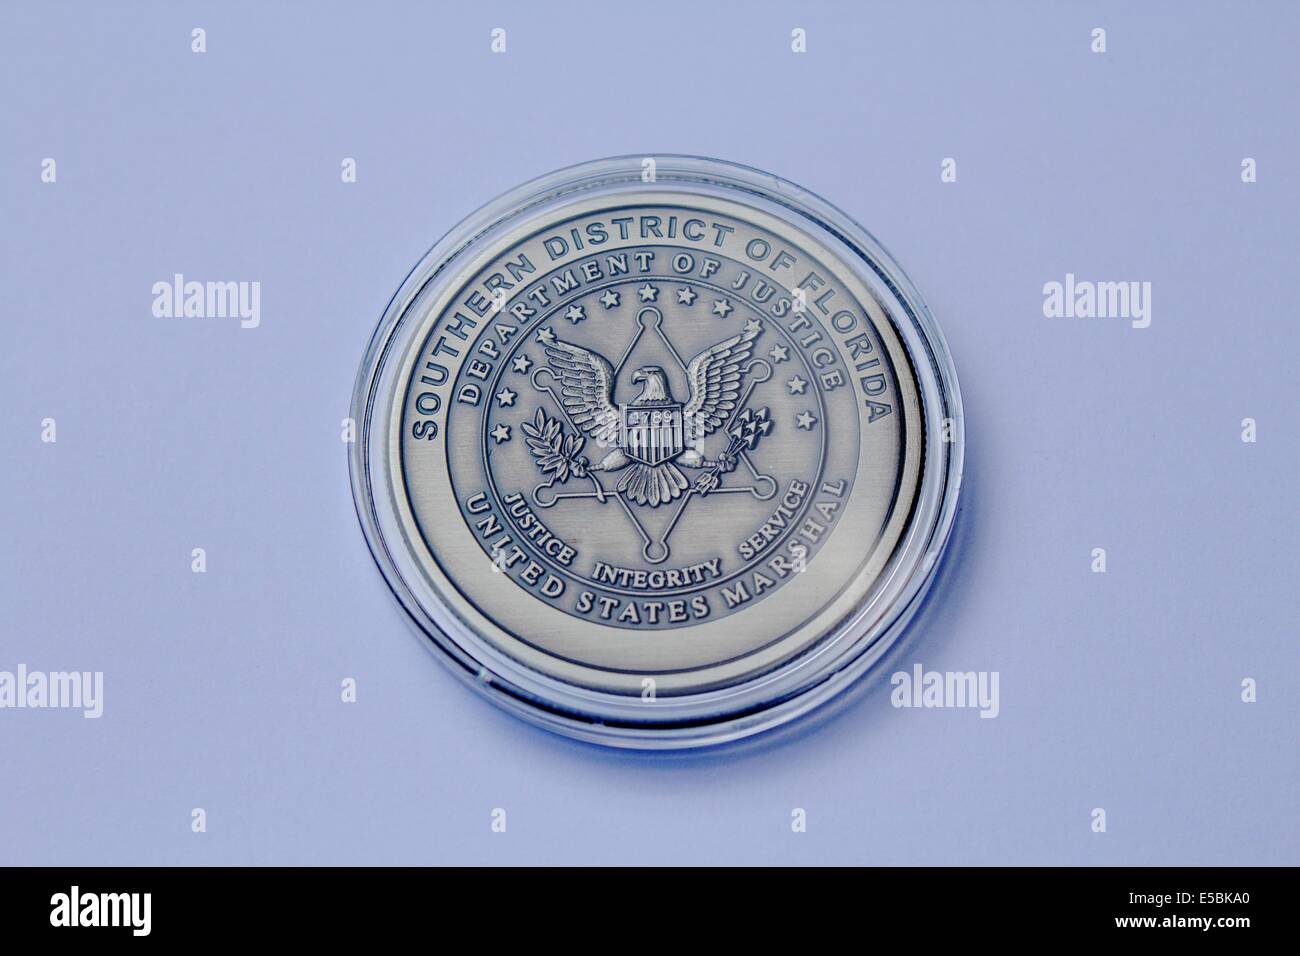 Southern District of Florida, Department of justice, United States Marshal coin Stock Photo